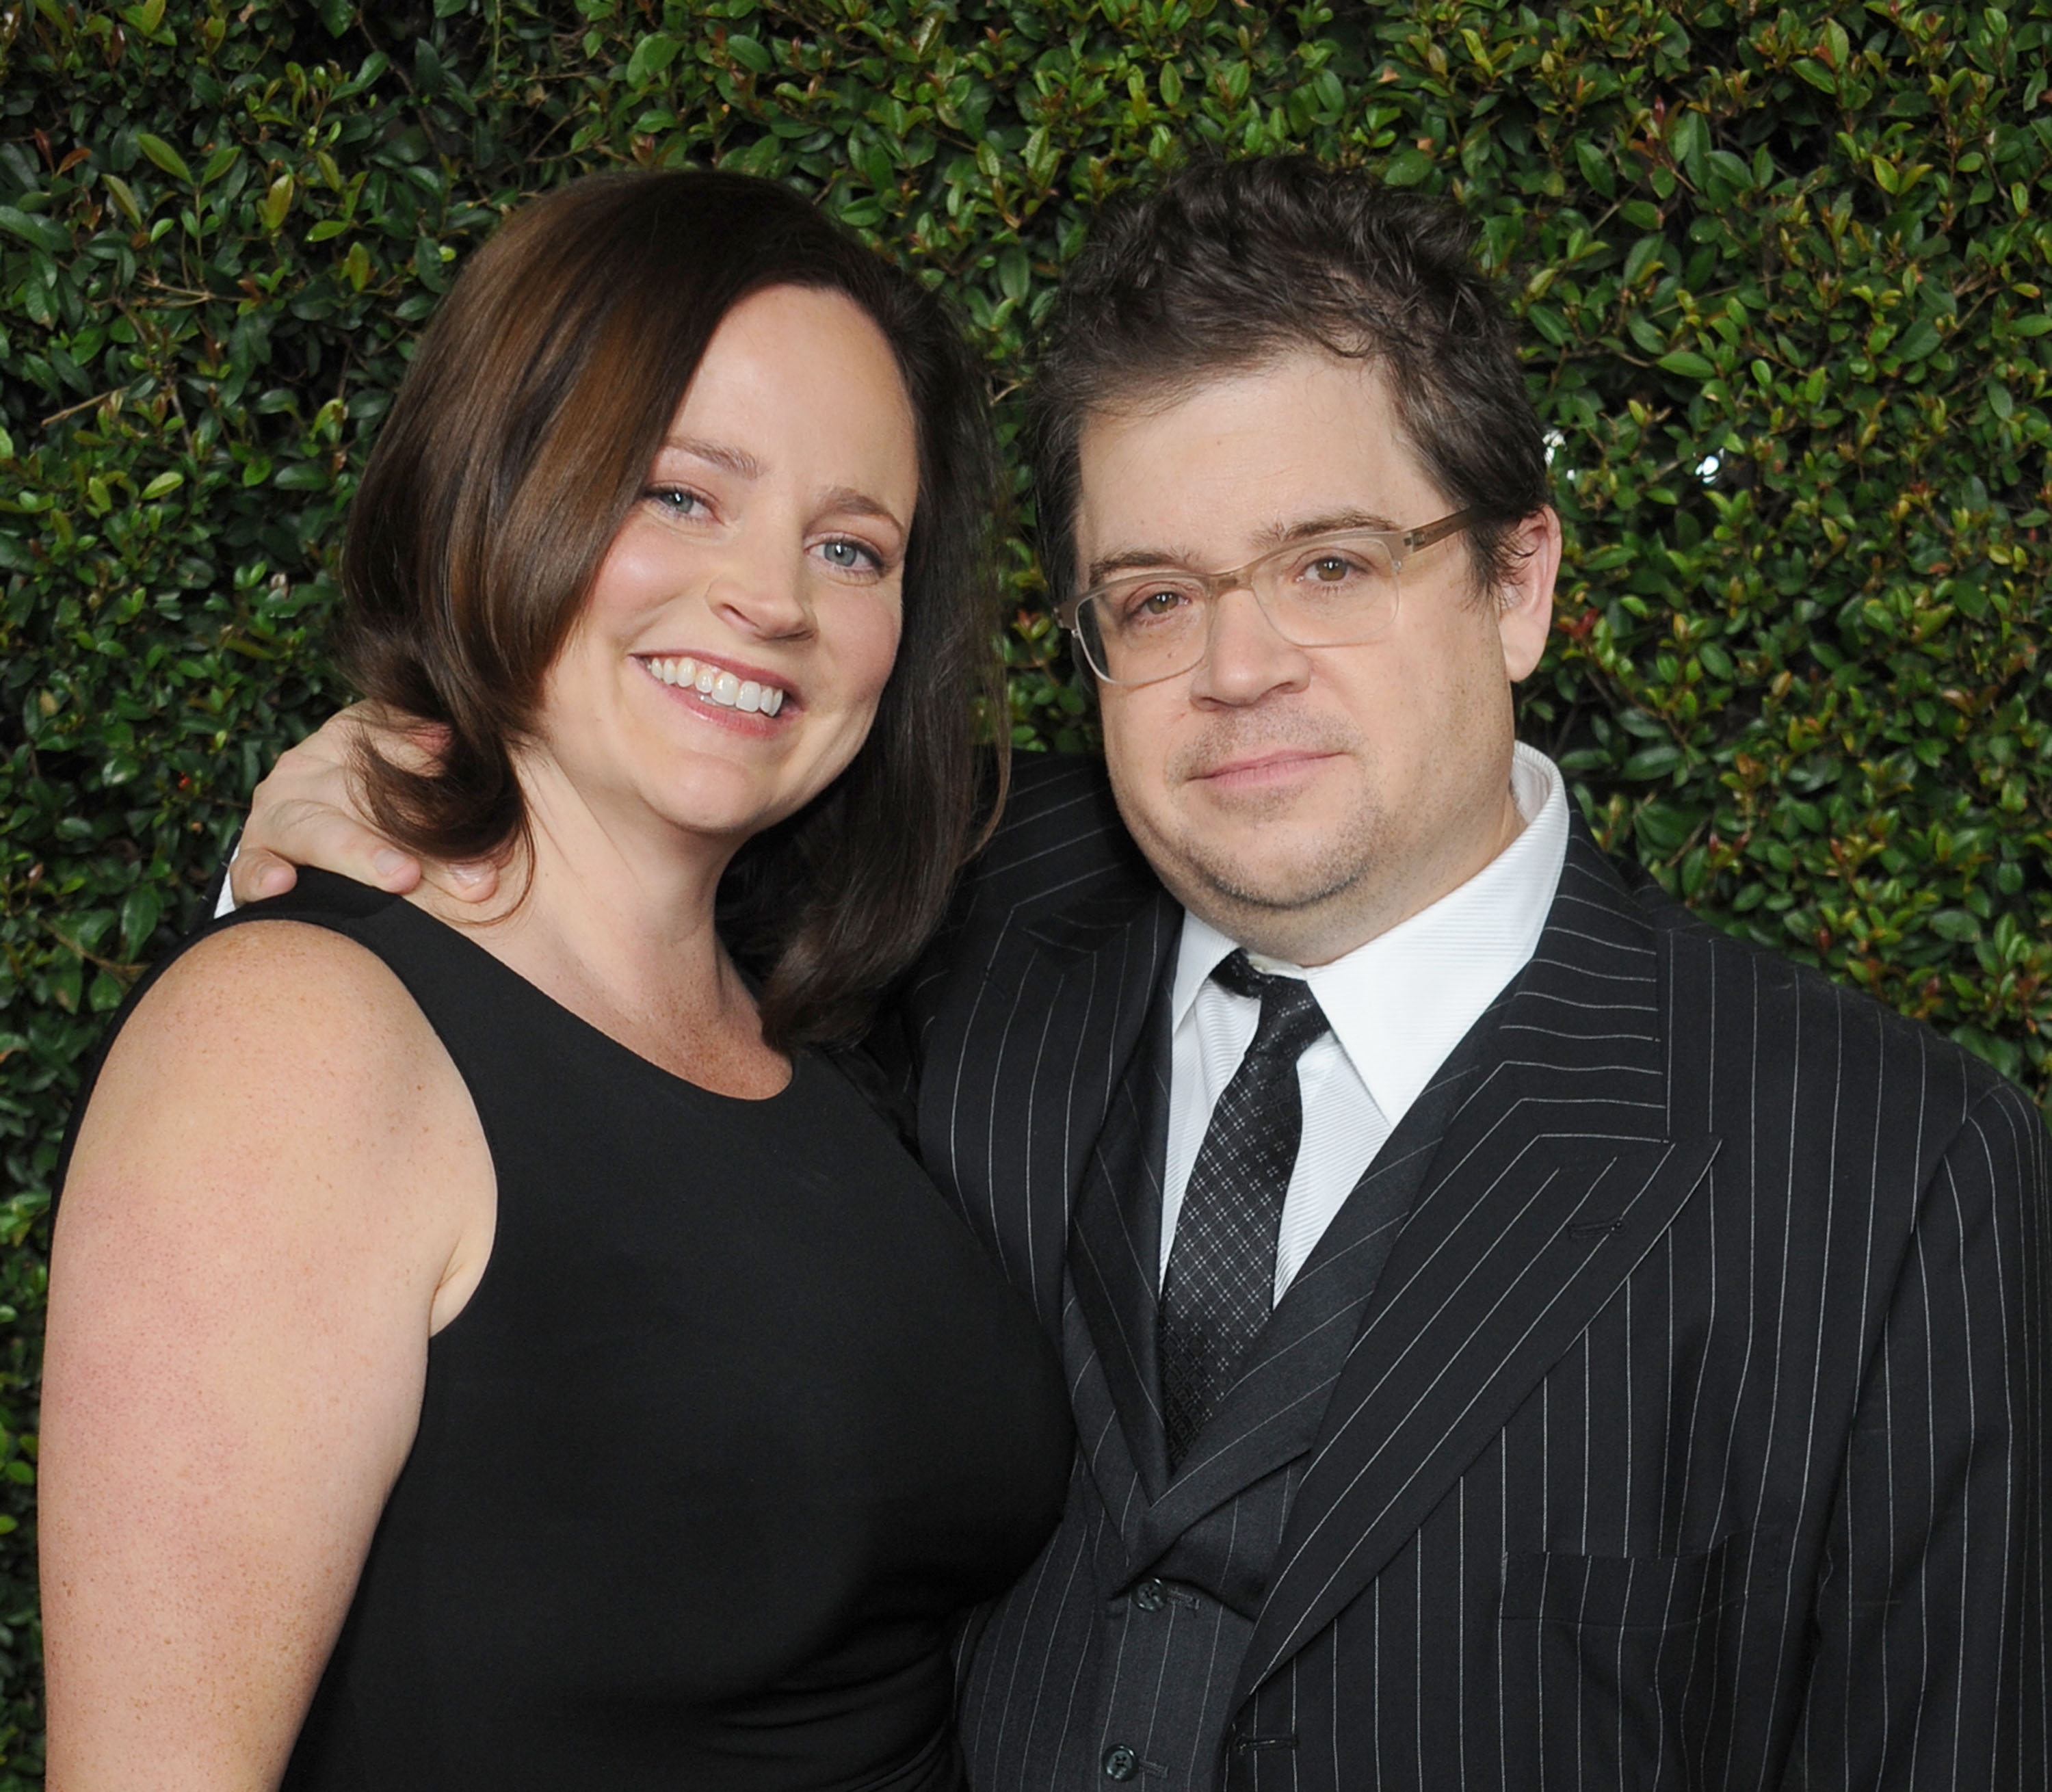 Actor Patton Oswalt and wife Michelle McNamara at the "Young Adult" Los Angeles Premiere at AMPAS Samuel Goldwyn Theater in Beverly Hills, Calif., on Dec. 15, 2011.